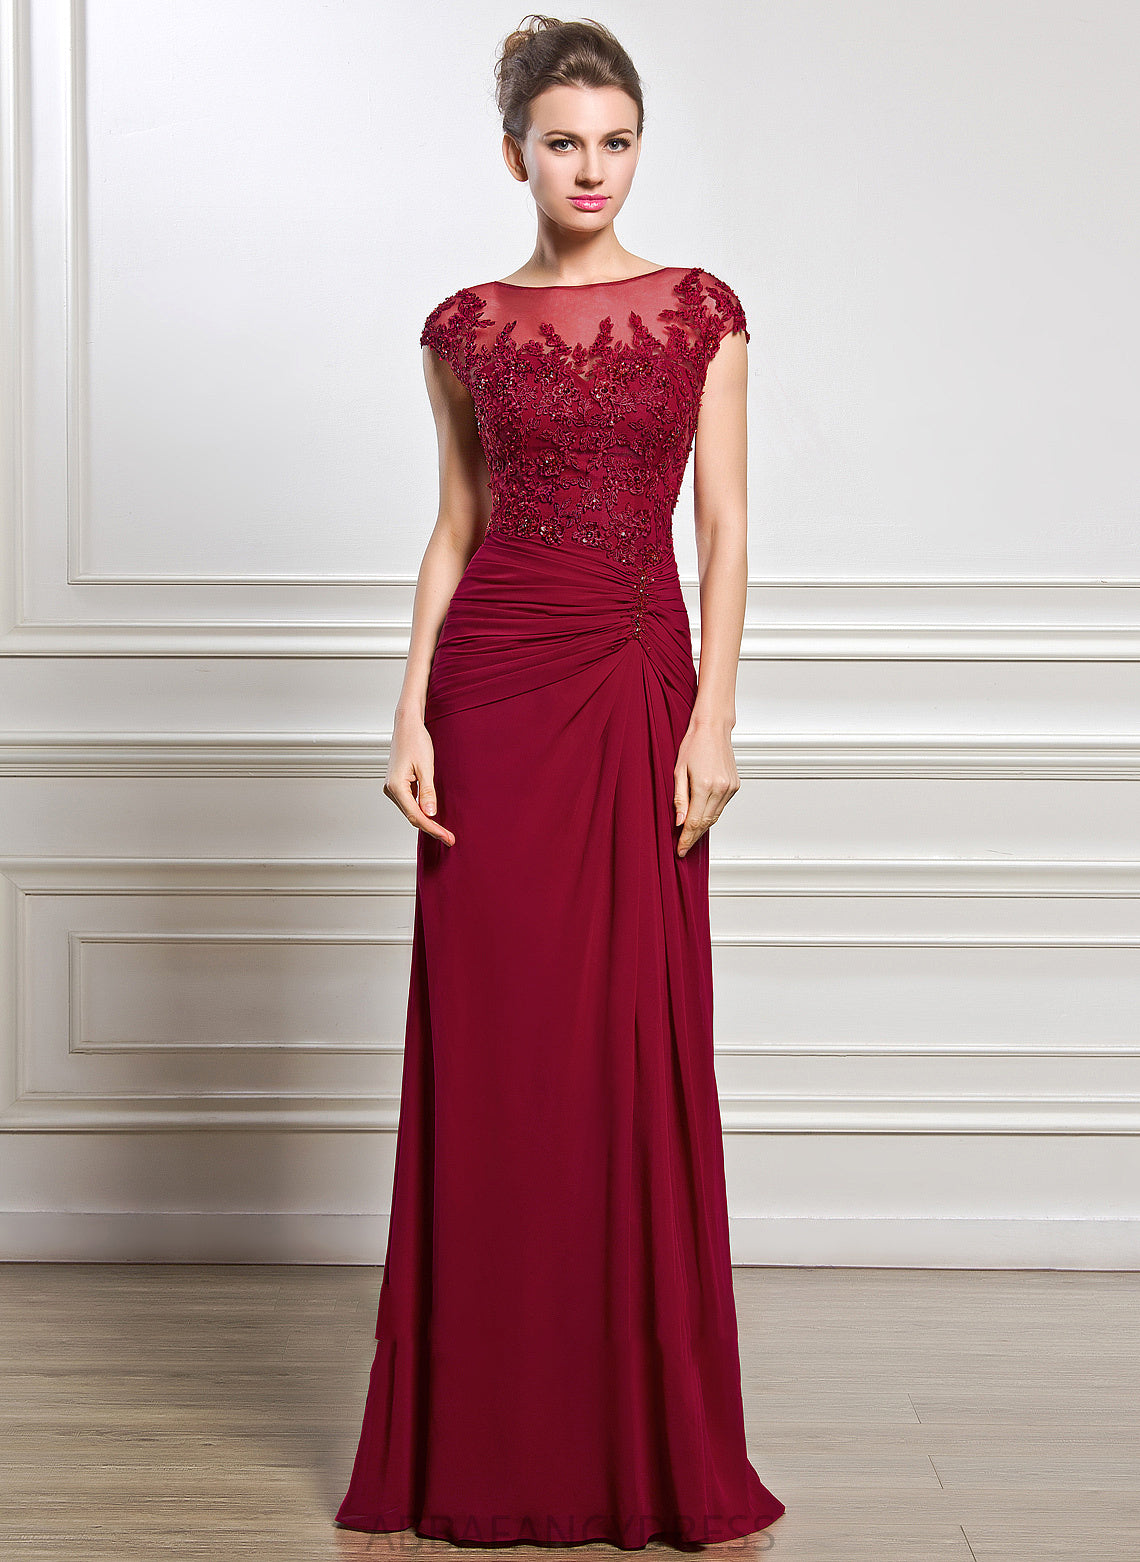 Sequins Front Floor-Length Mother of the Bride Dresses Bride Lace With Chiffon Split the Neck Appliques Sheath/Column Mother Beading Asia of Dress Scoop Ruffle